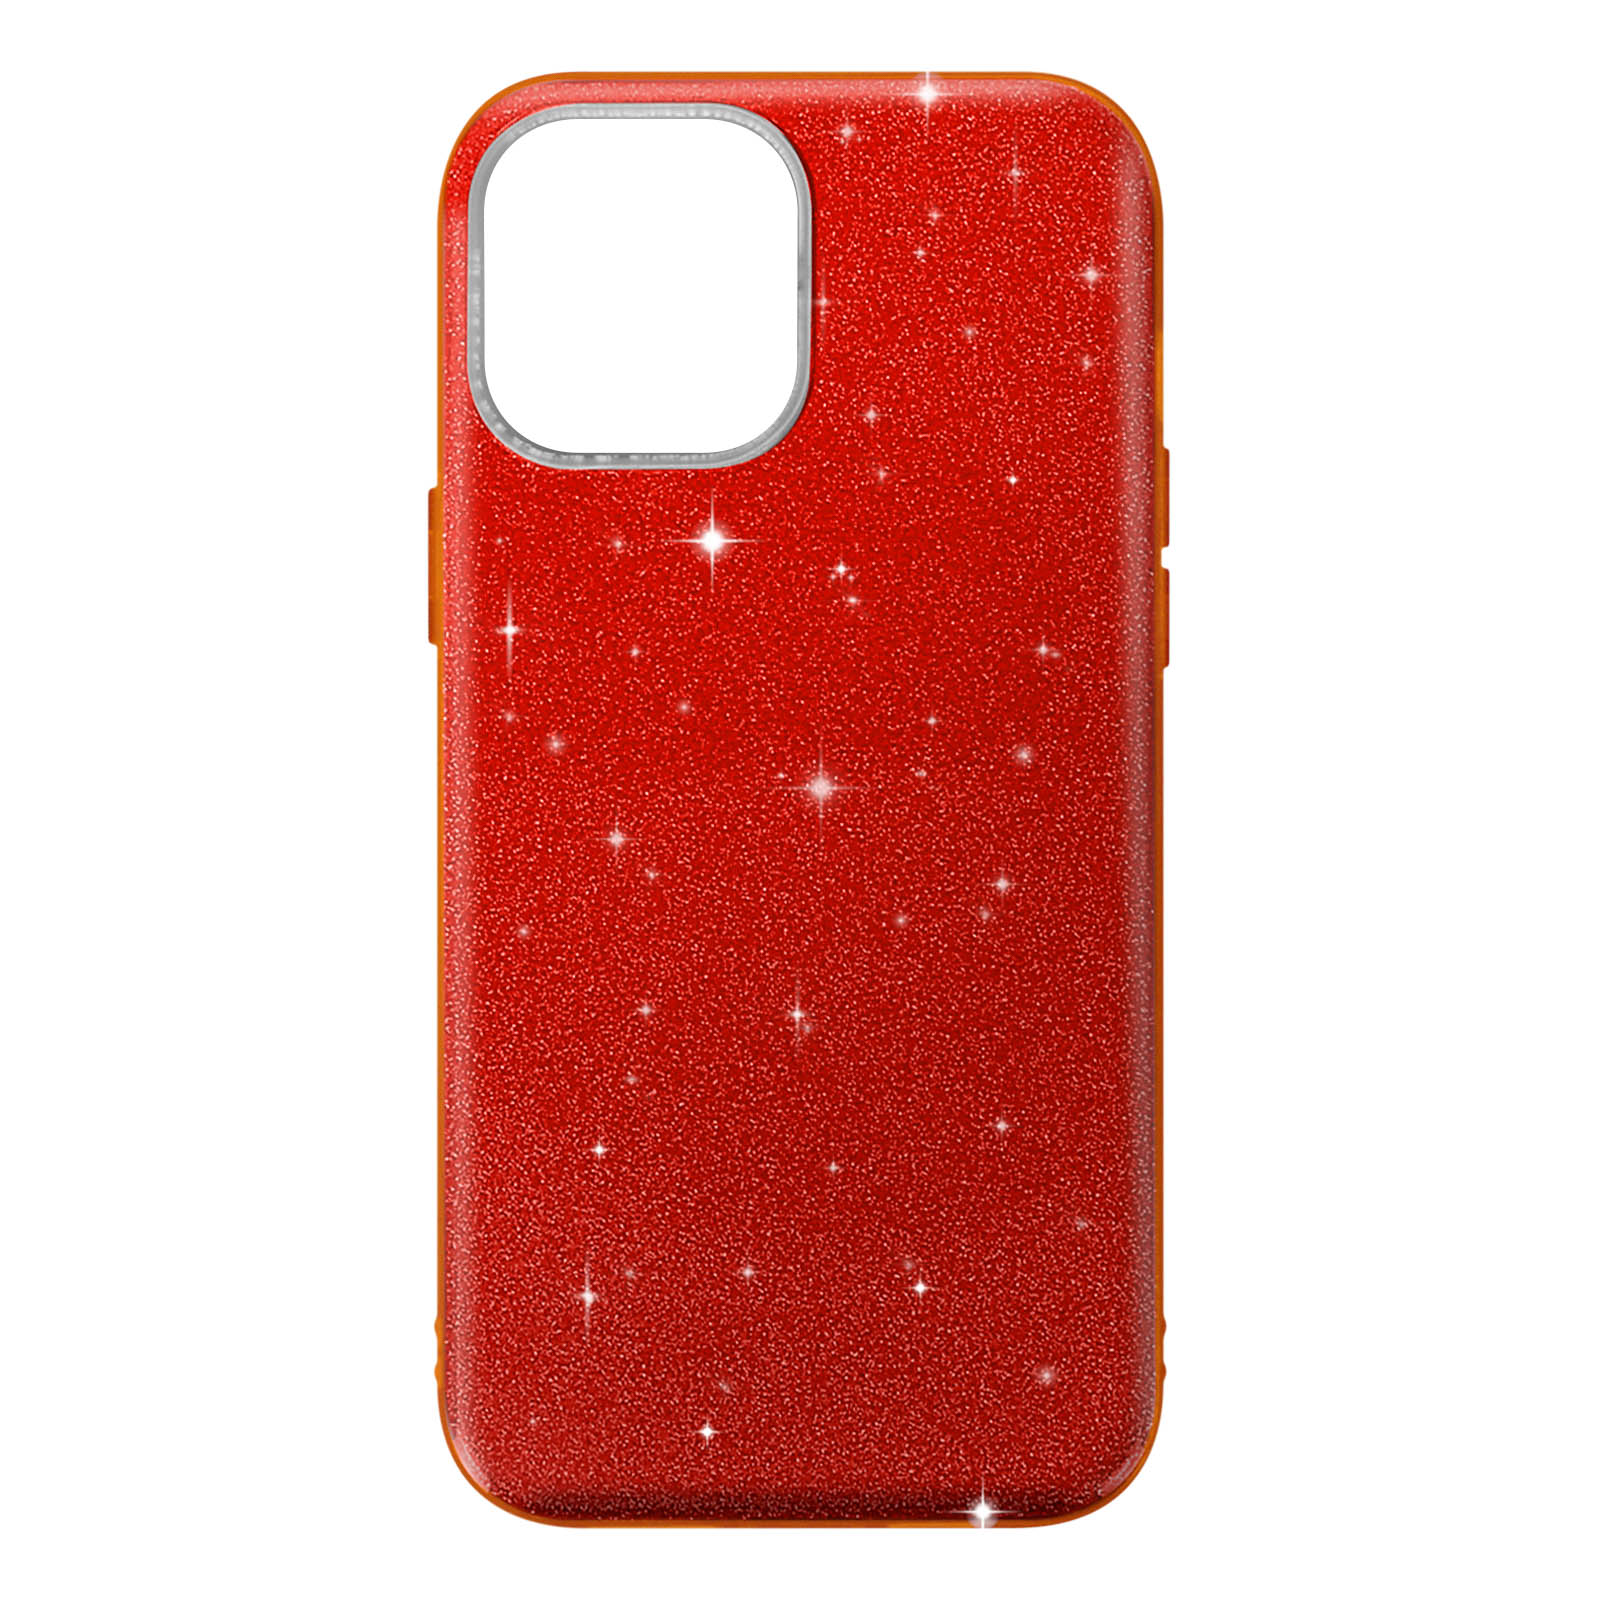 Pro AVIZAR iPhone Apple, Max, Backcover, 12 Series, Rot Papay